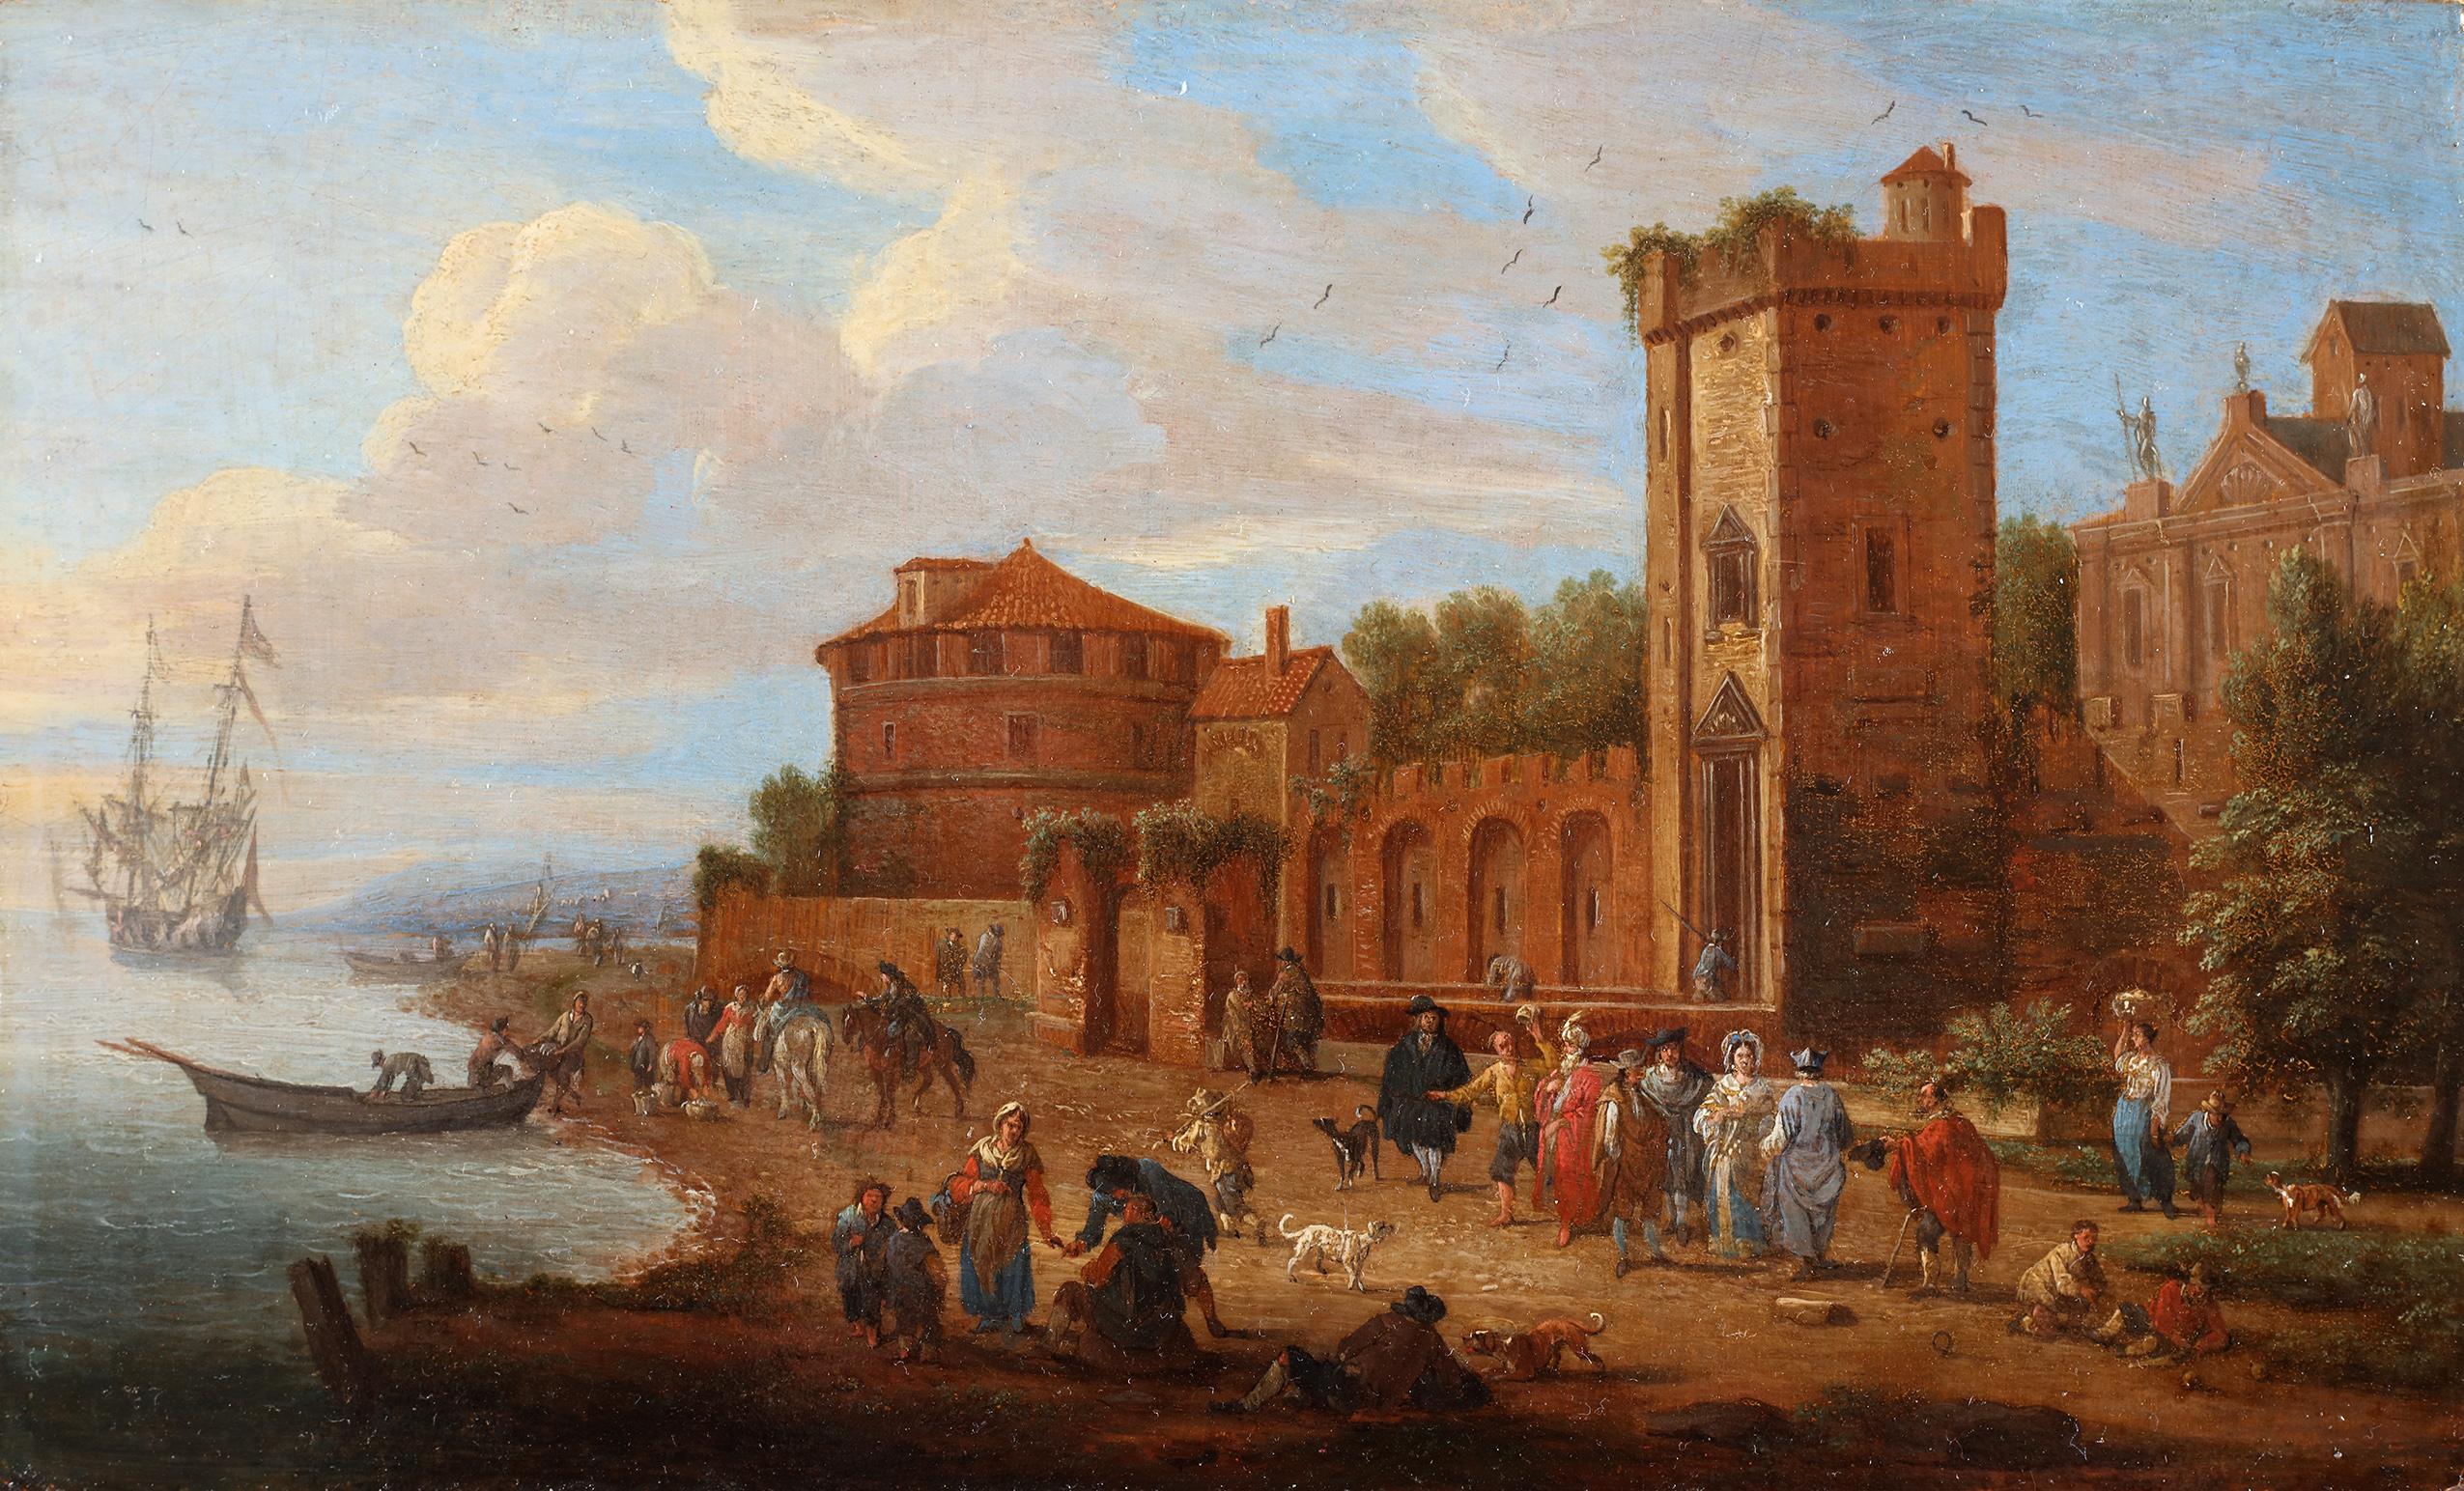 Animated harbor scene near a fortified palace - Matthijs Schoevaerdts - Flemish School Painting by Mathijs Schoevaerdts